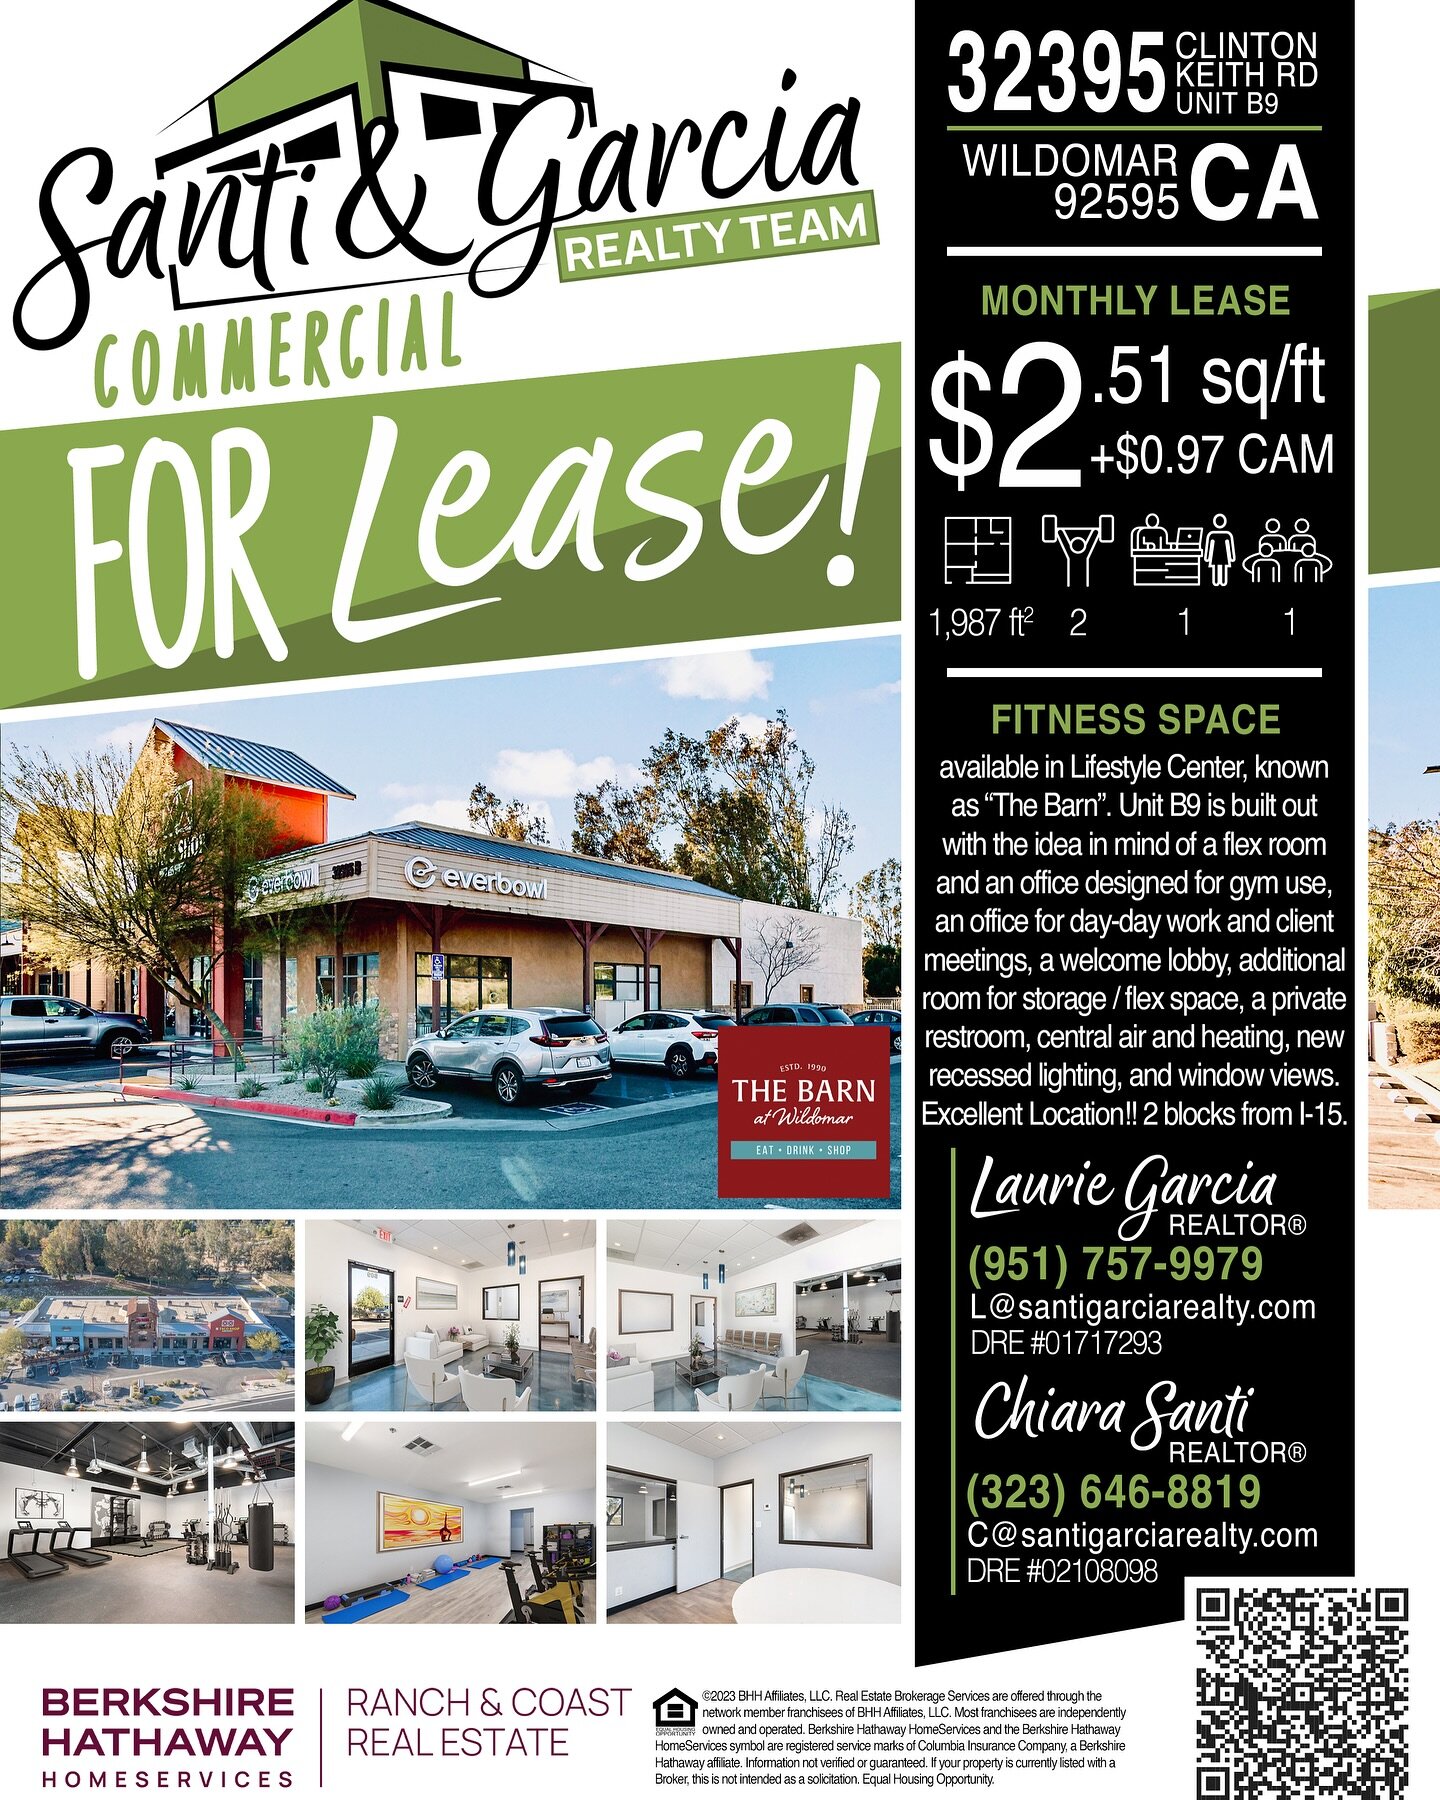 📌FOR LEASE‼️

📍32395 Clinton Keith Rd, Unit B9, Wildomar, CA. 92595

👉More info at santigarciarealty.com

#SantiGarciaRealty #realestate #realtor #realty #carealestategroup #commercialrealestate #residentialrealestate